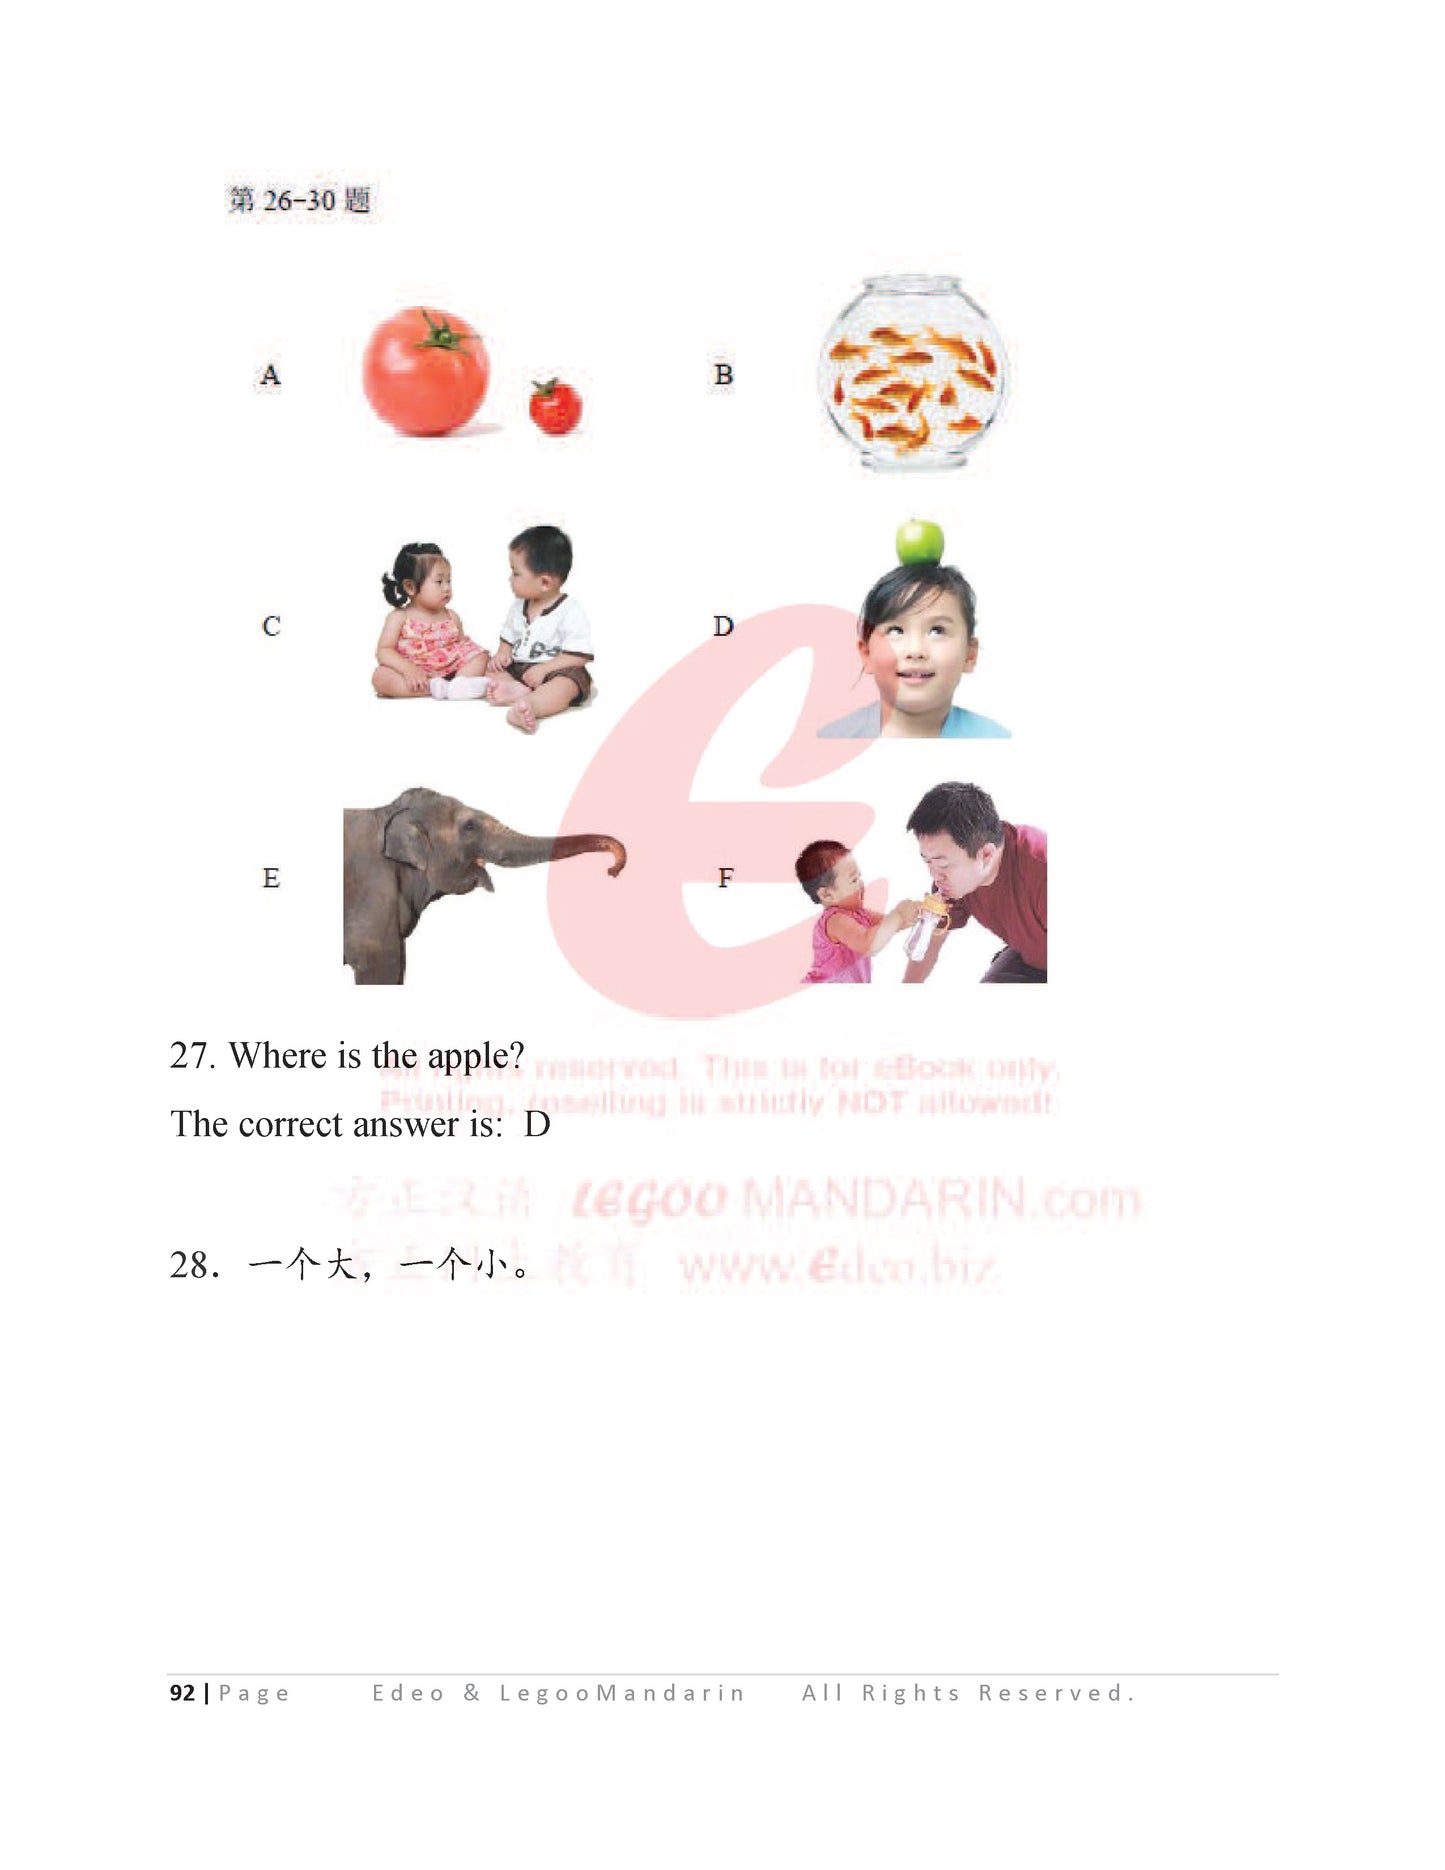 YCT 1 Chinese Intensive Reading for Kids Y10900 Official Mock 少儿汉语考试模拟考题